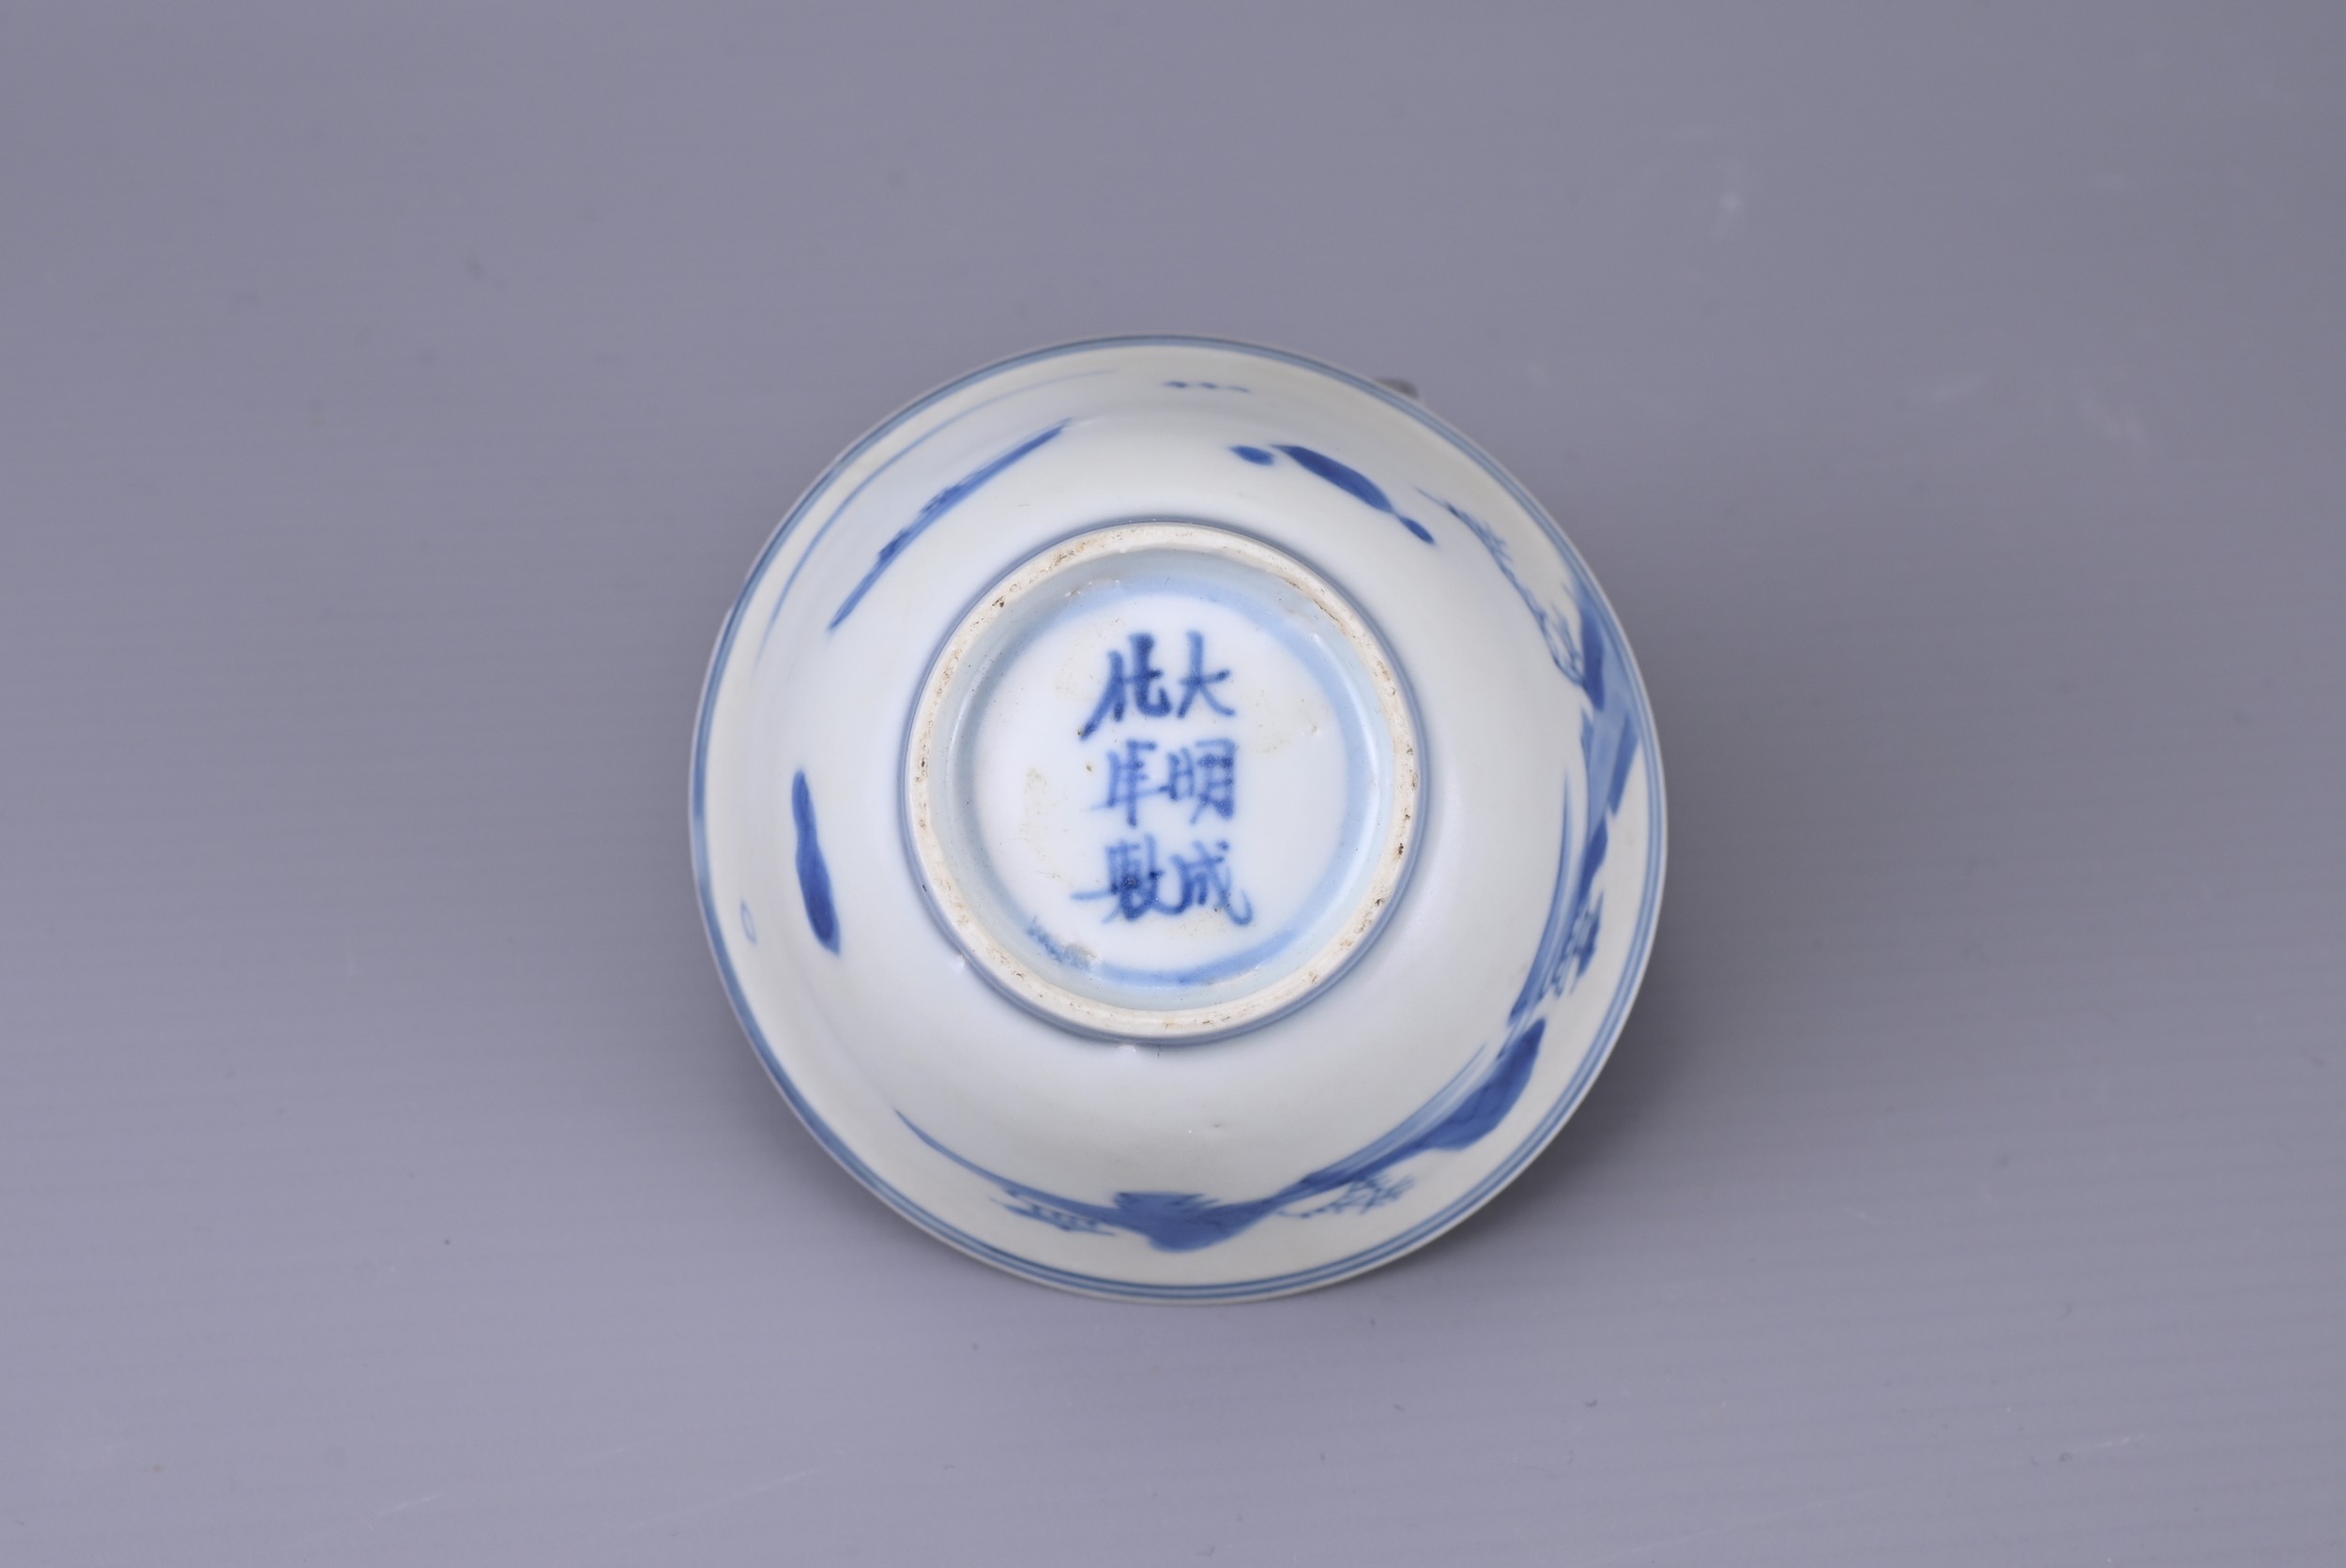 A CHINESE BLUE AND WHITE PORCELAIN CUP, CHENGHUA MARK. Decorated with boat in a coastal landscape - Image 5 of 5